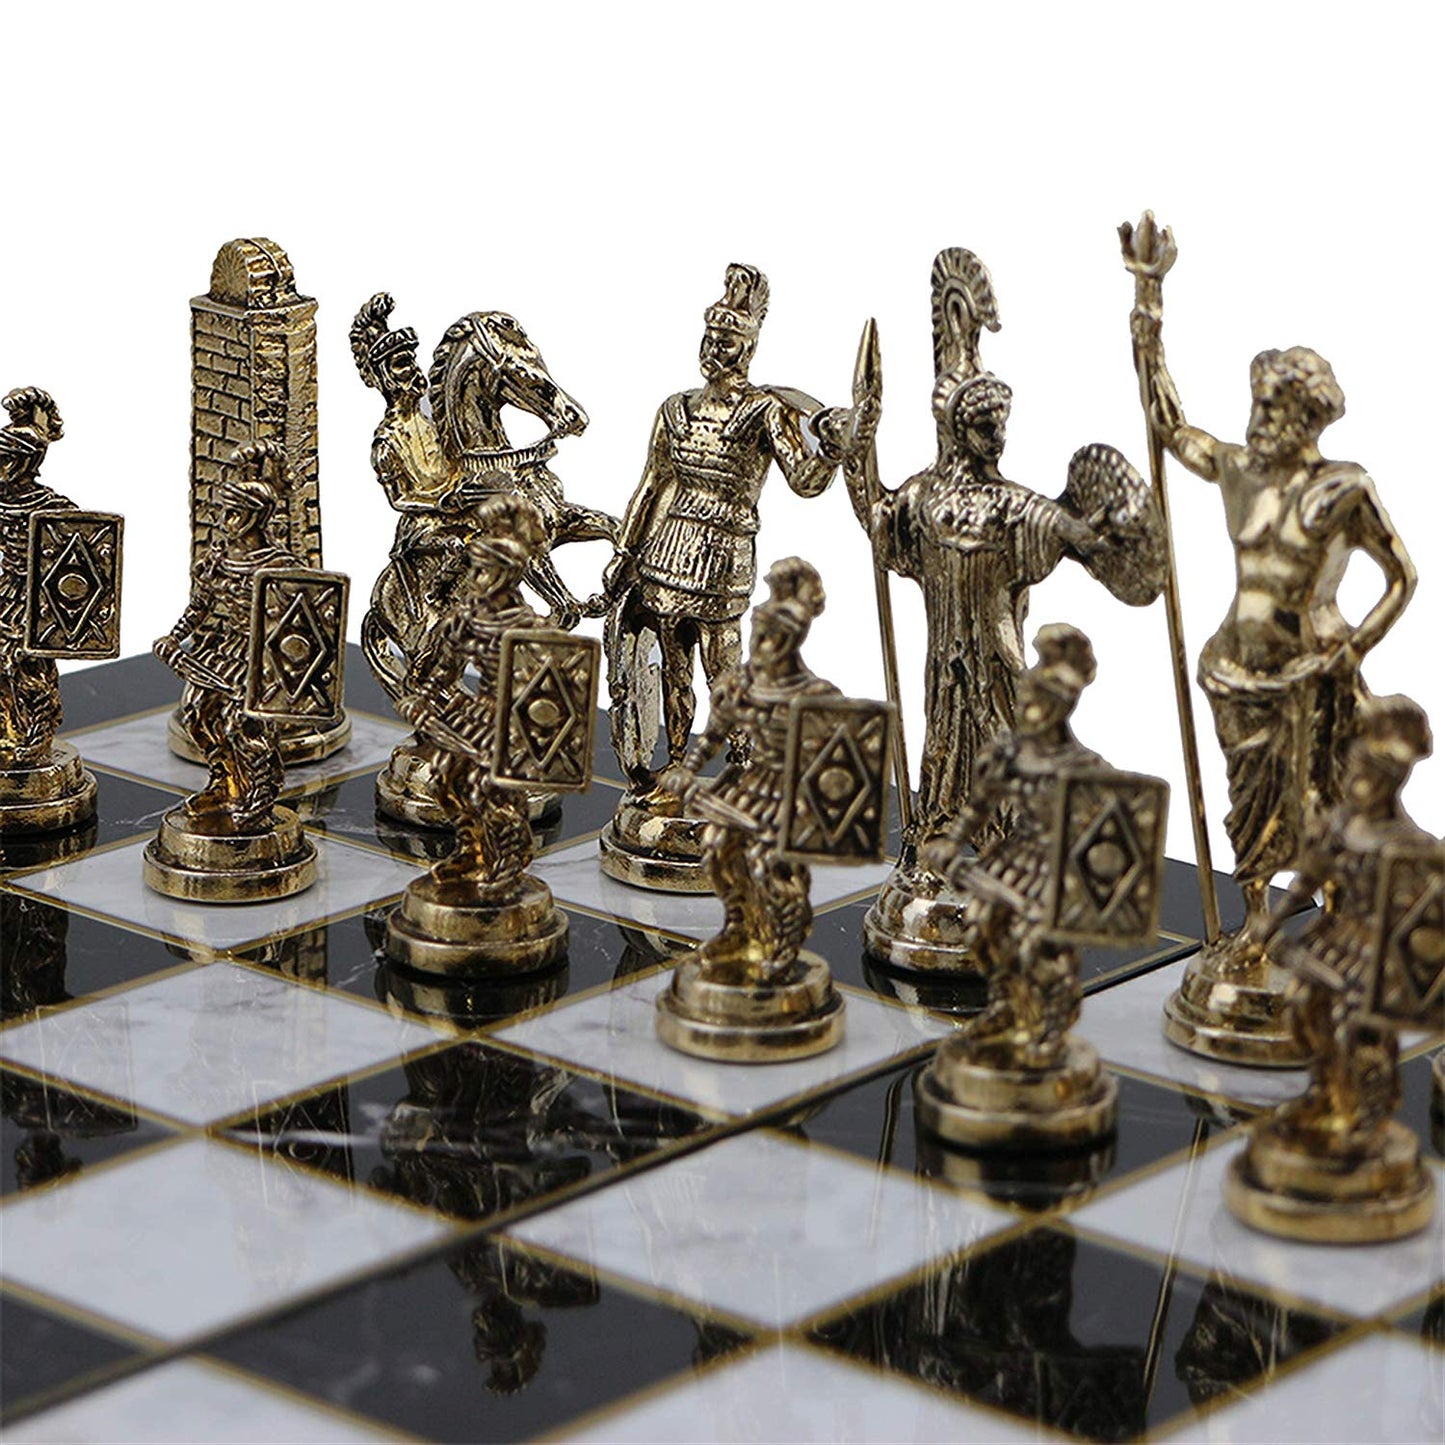 (Only Chess Pieces) Historical Rome Chess 7 cm (Board is not Included) Sculptures and Statues